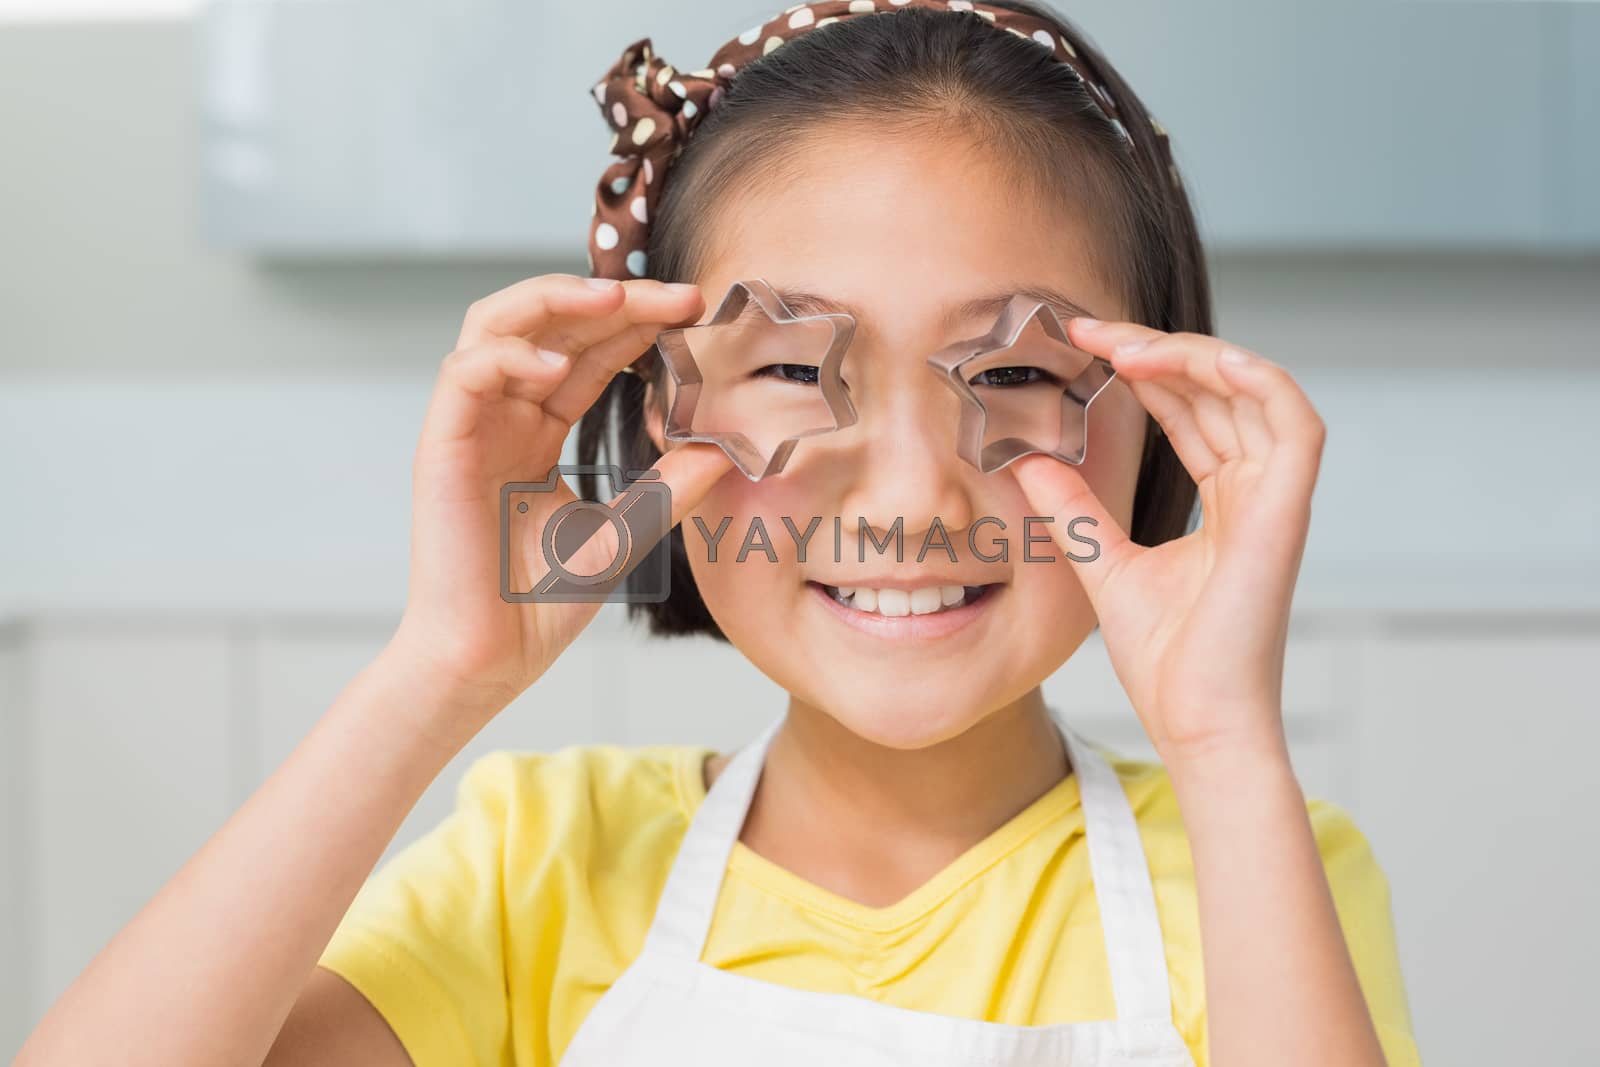 Royalty free image of Closeup portrait of a smiling young girl holding cookie molds by Wavebreakmedia